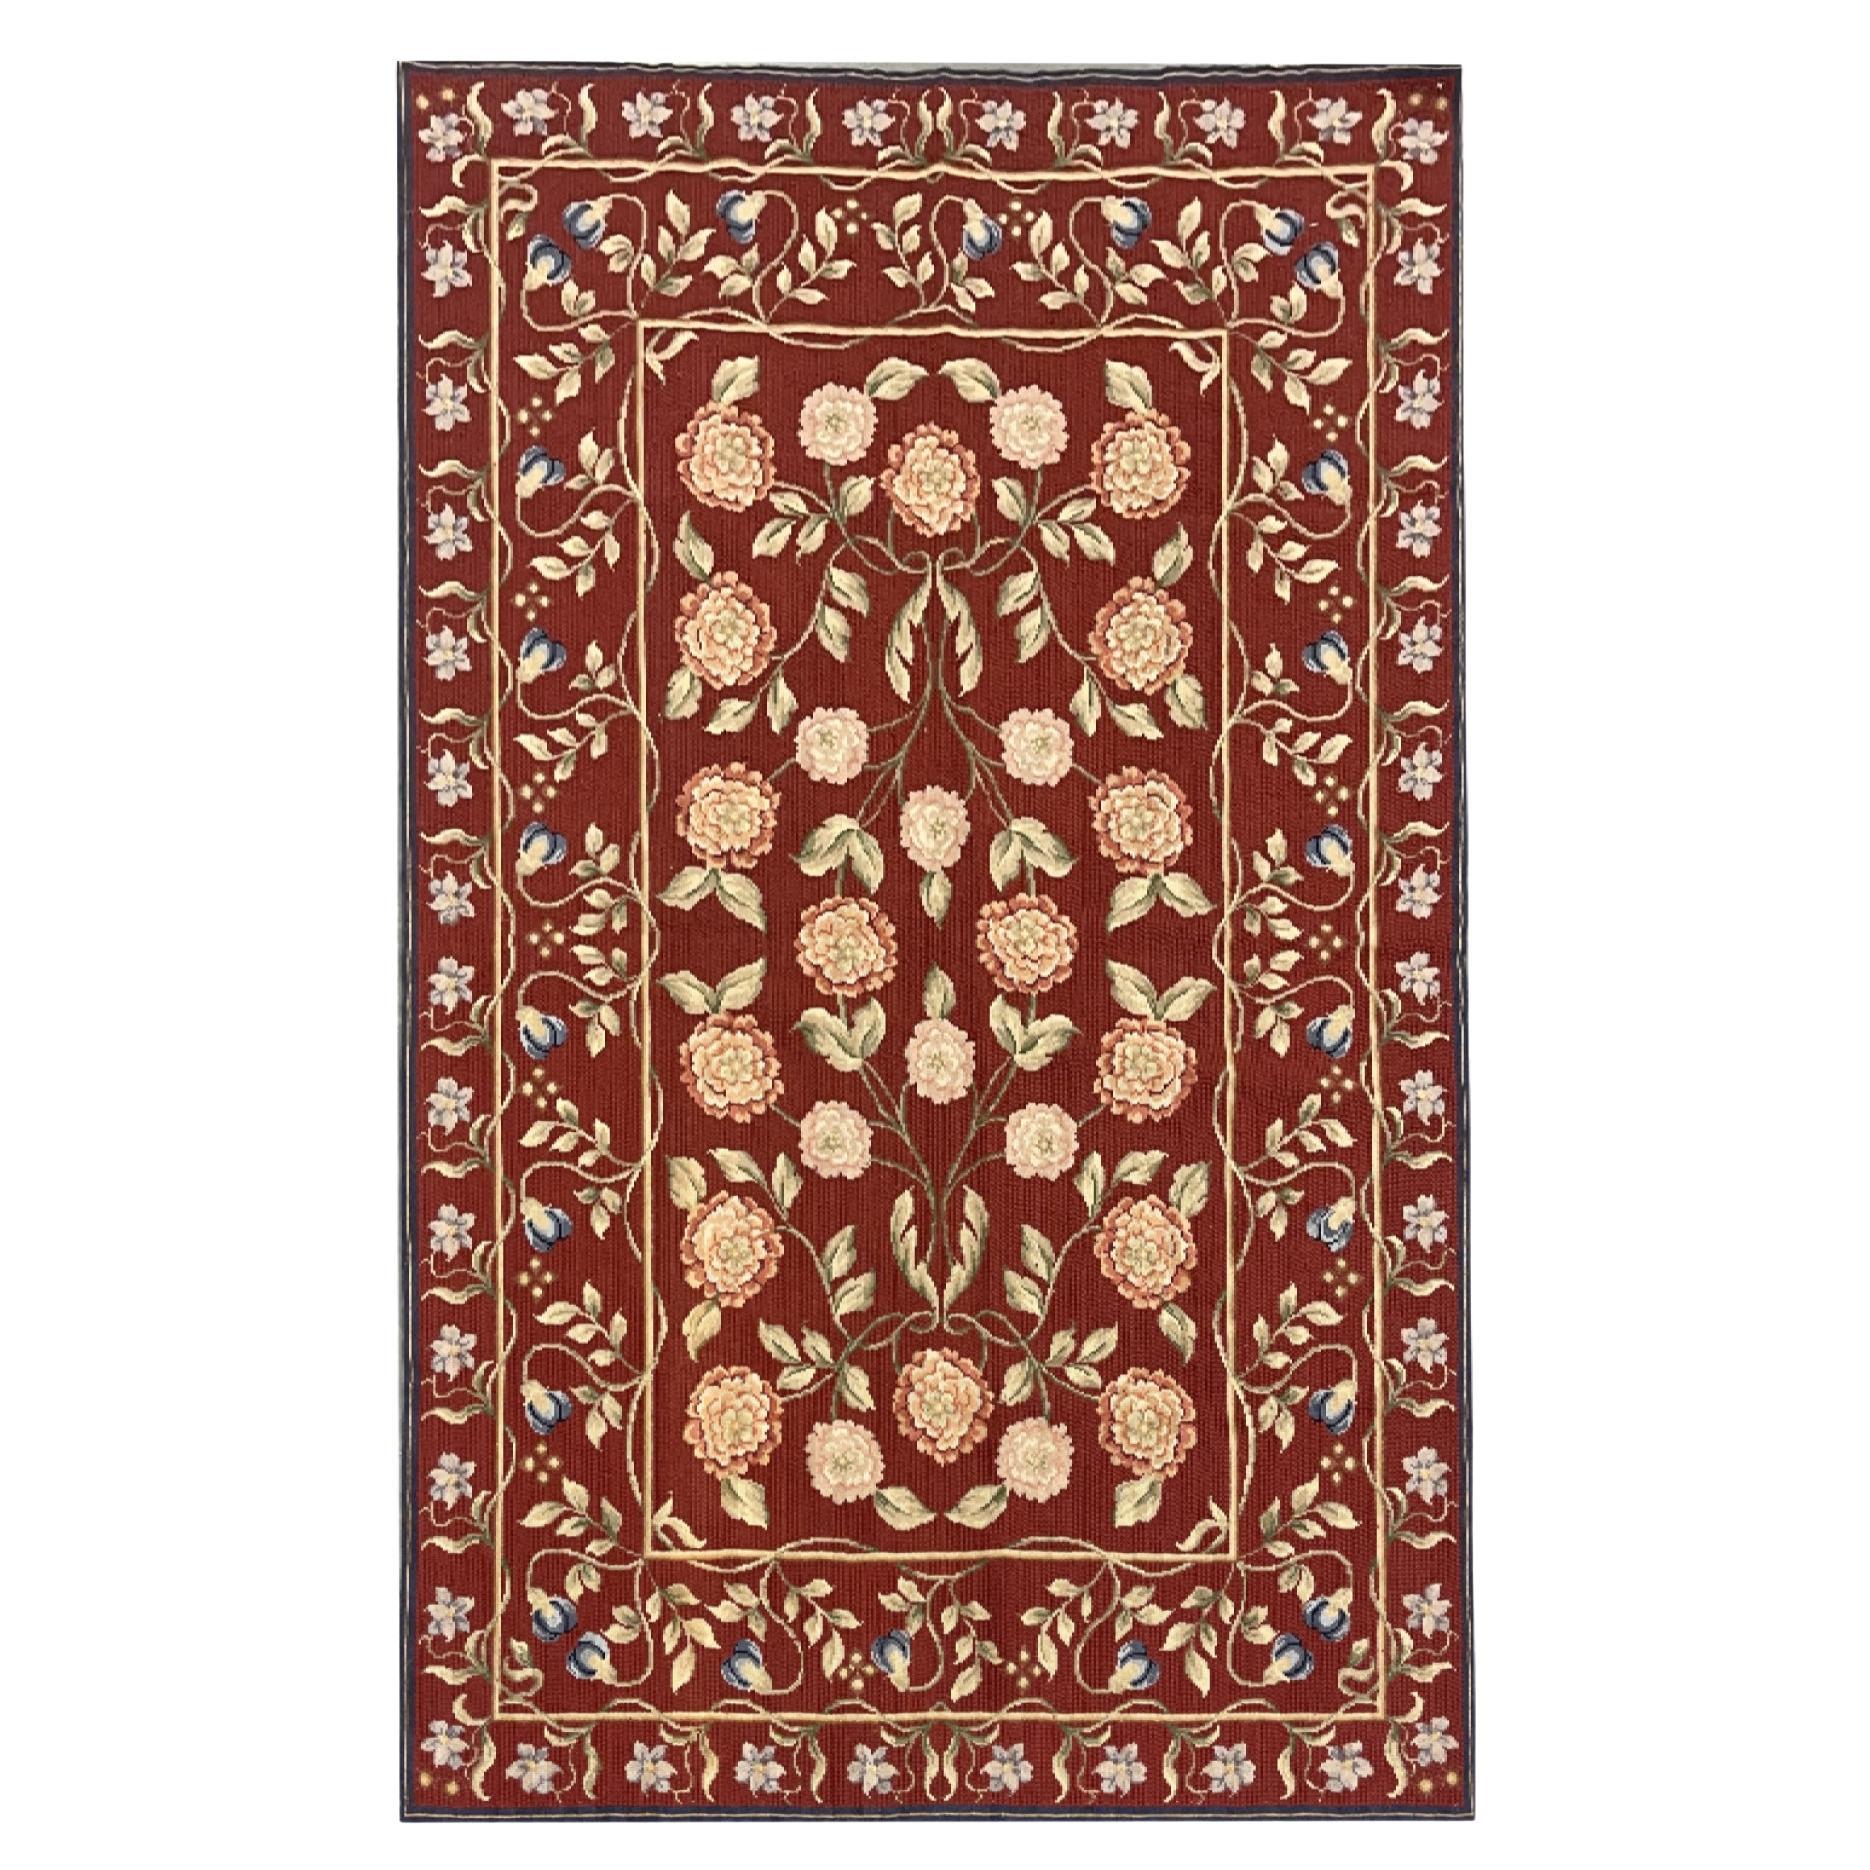 French Aubusson Rug Red Traditional Carpet Handwoven Wool Floral Needlepoint Rug